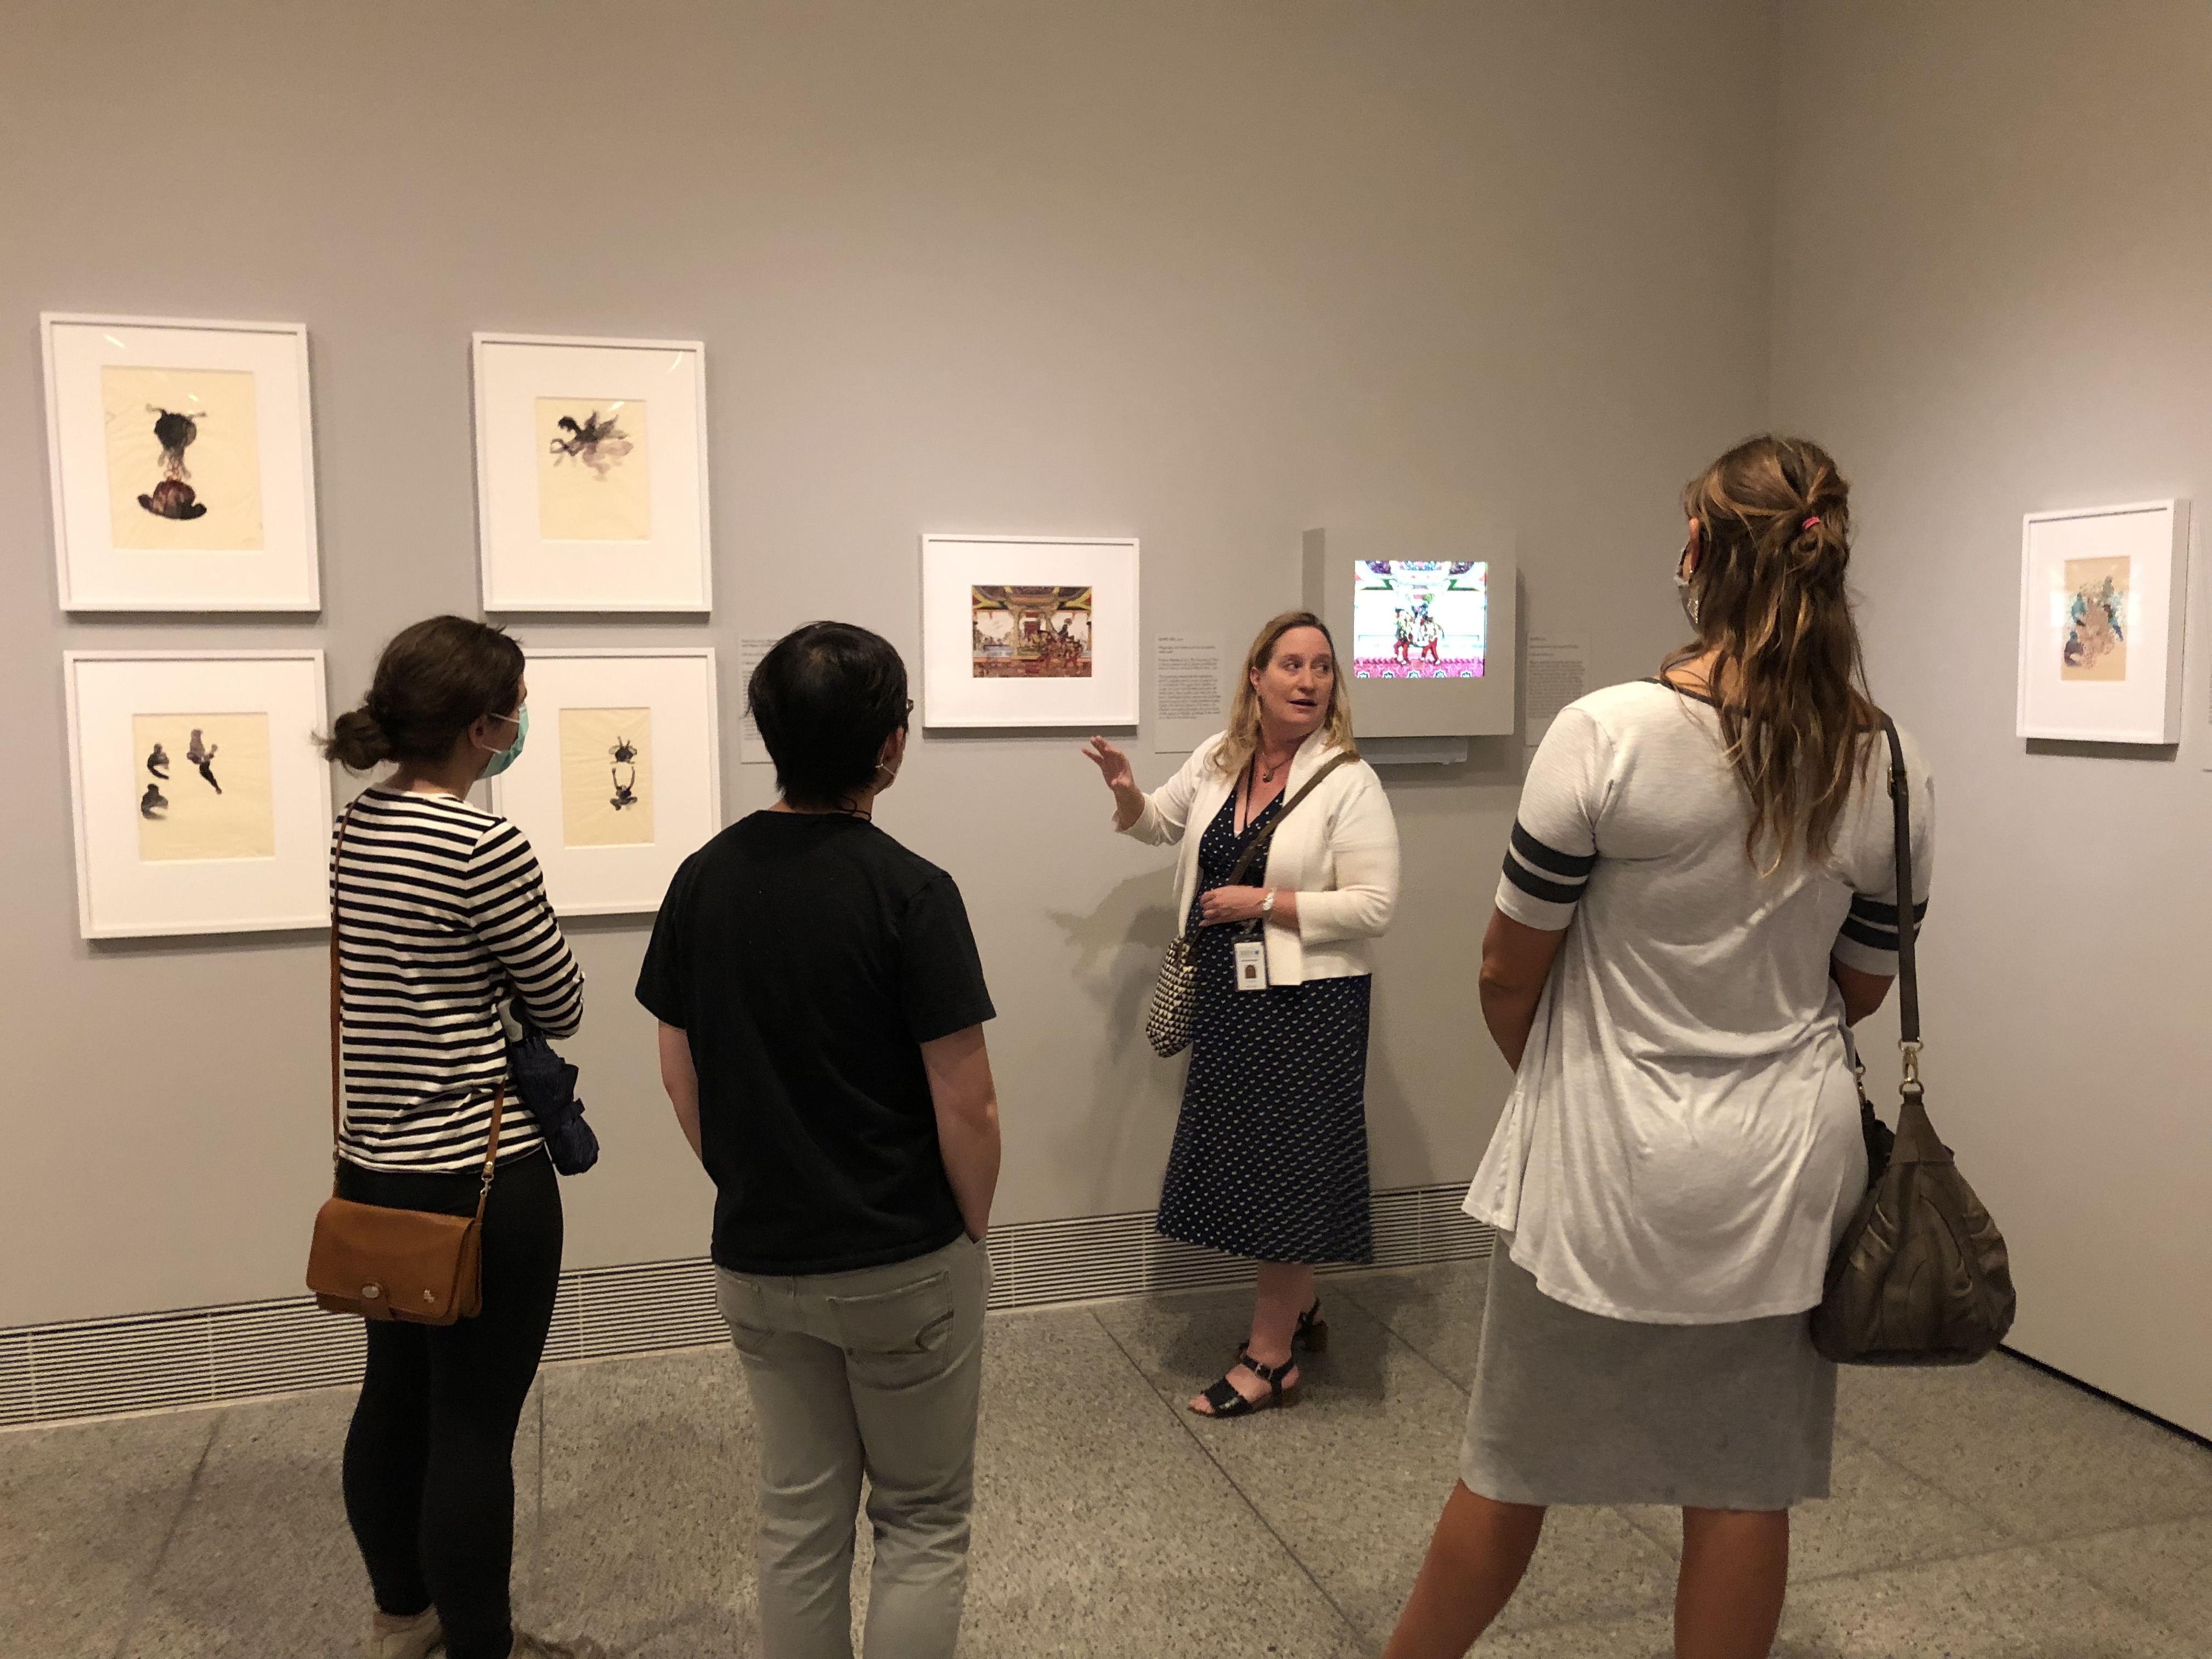 A person gesturing towards a black and tan art piece while three people observe